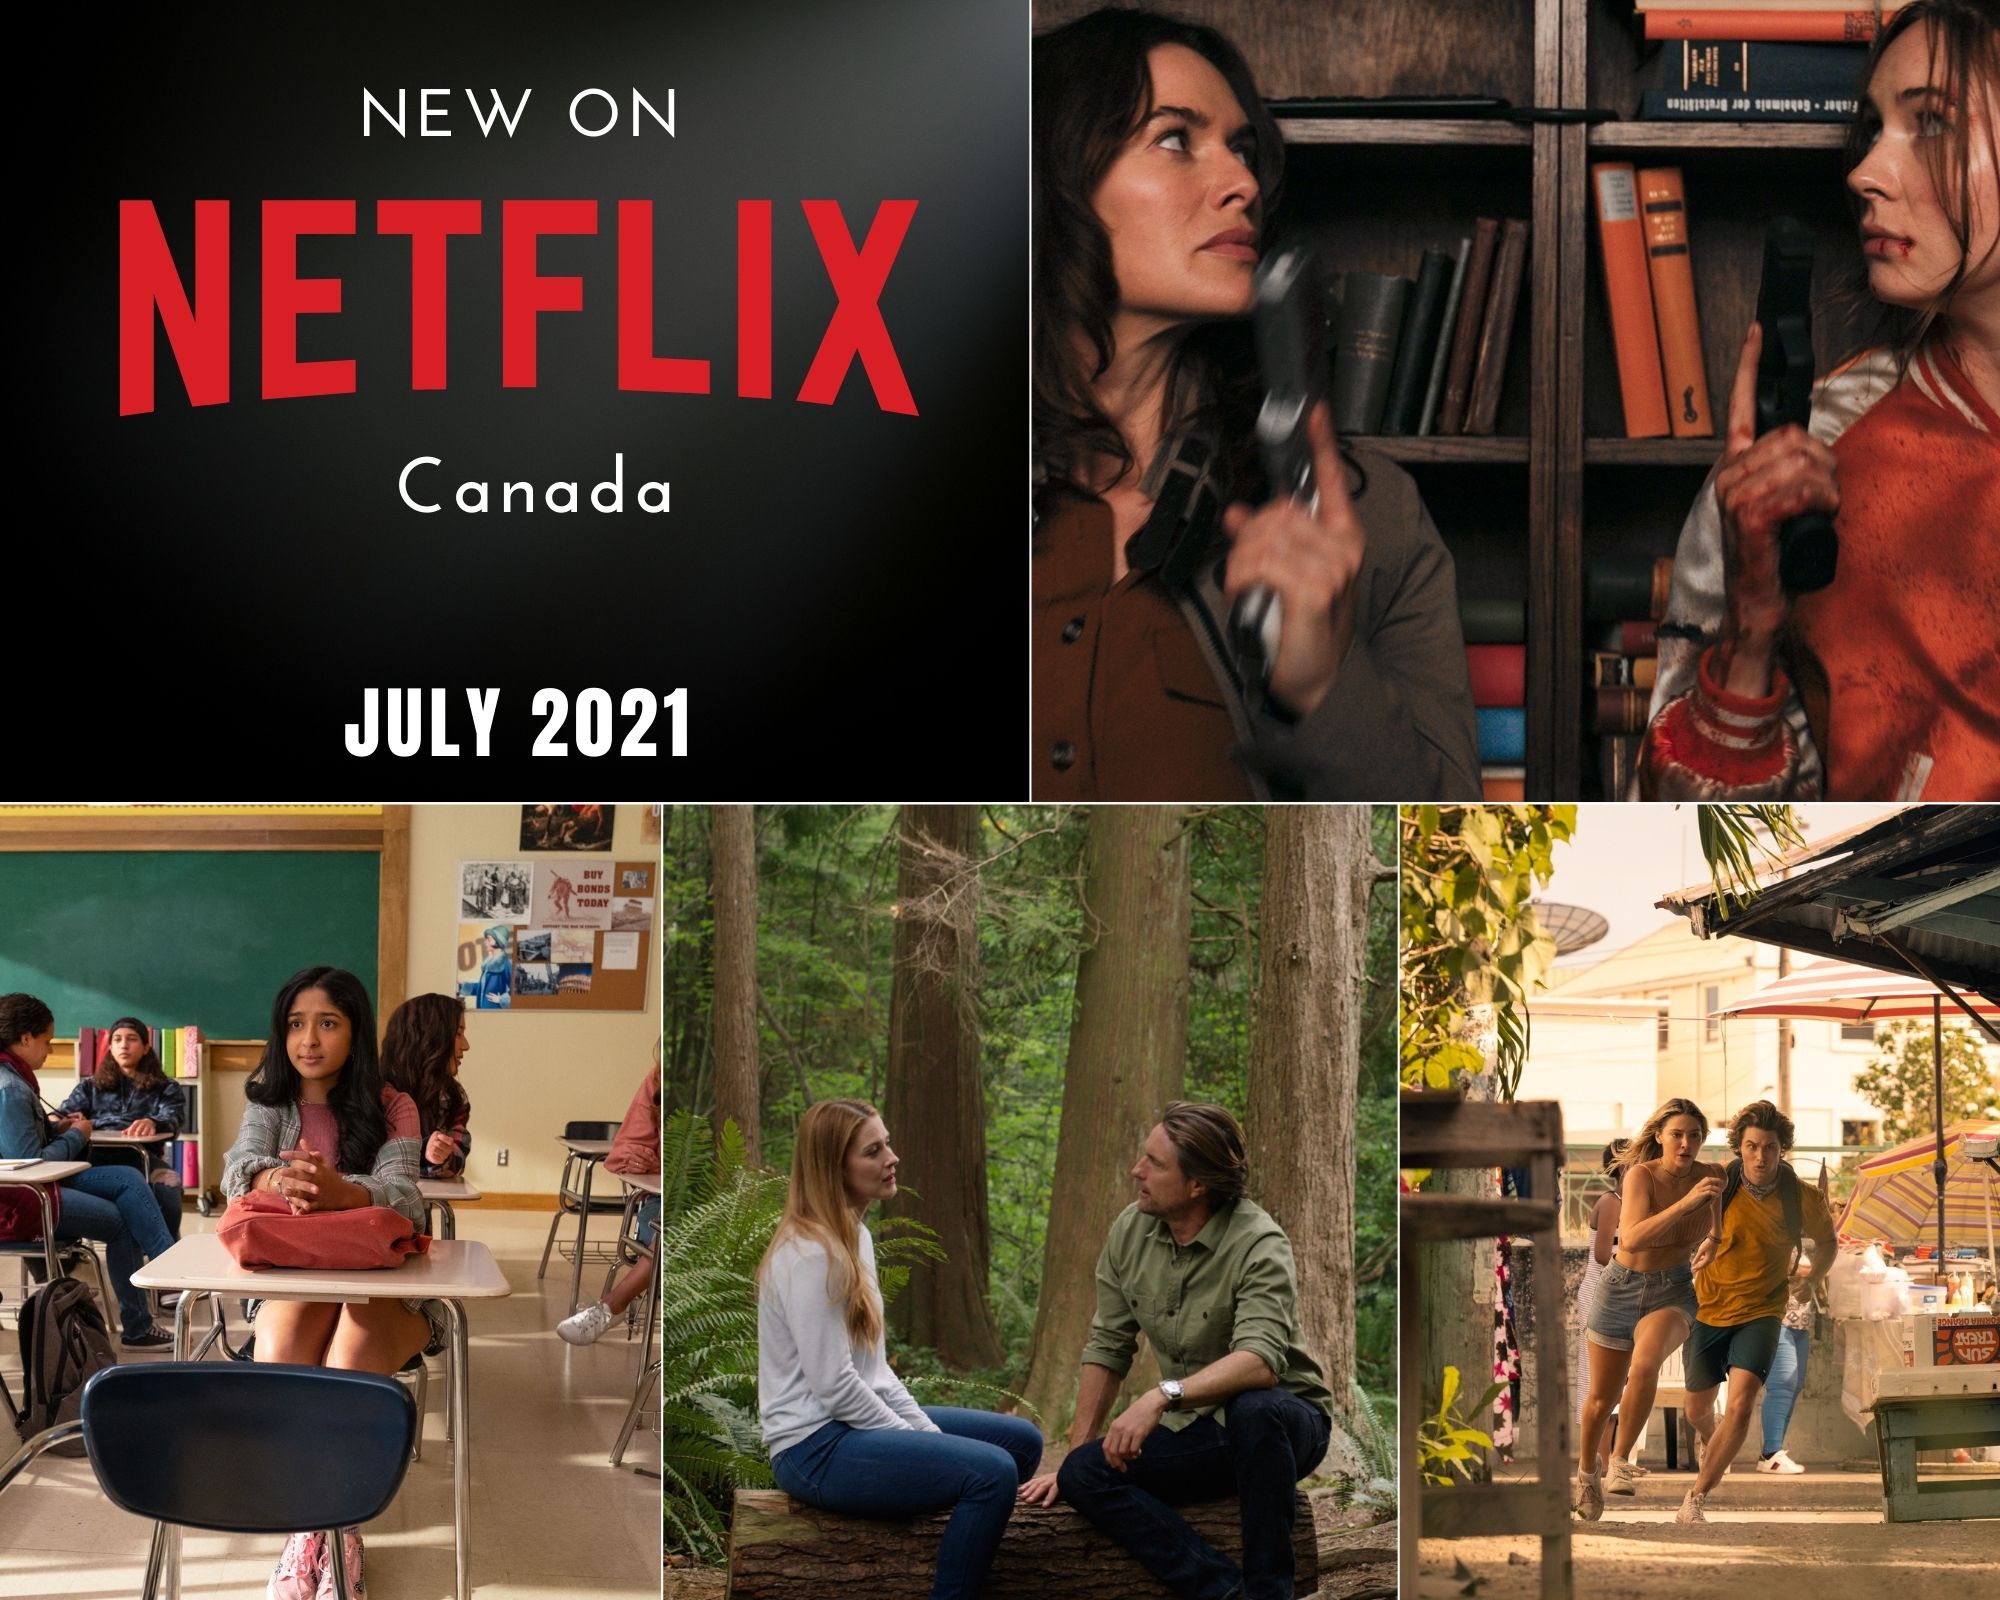 Check out what’s new on Netflix Canada July 2021 « Celebrity Gossip